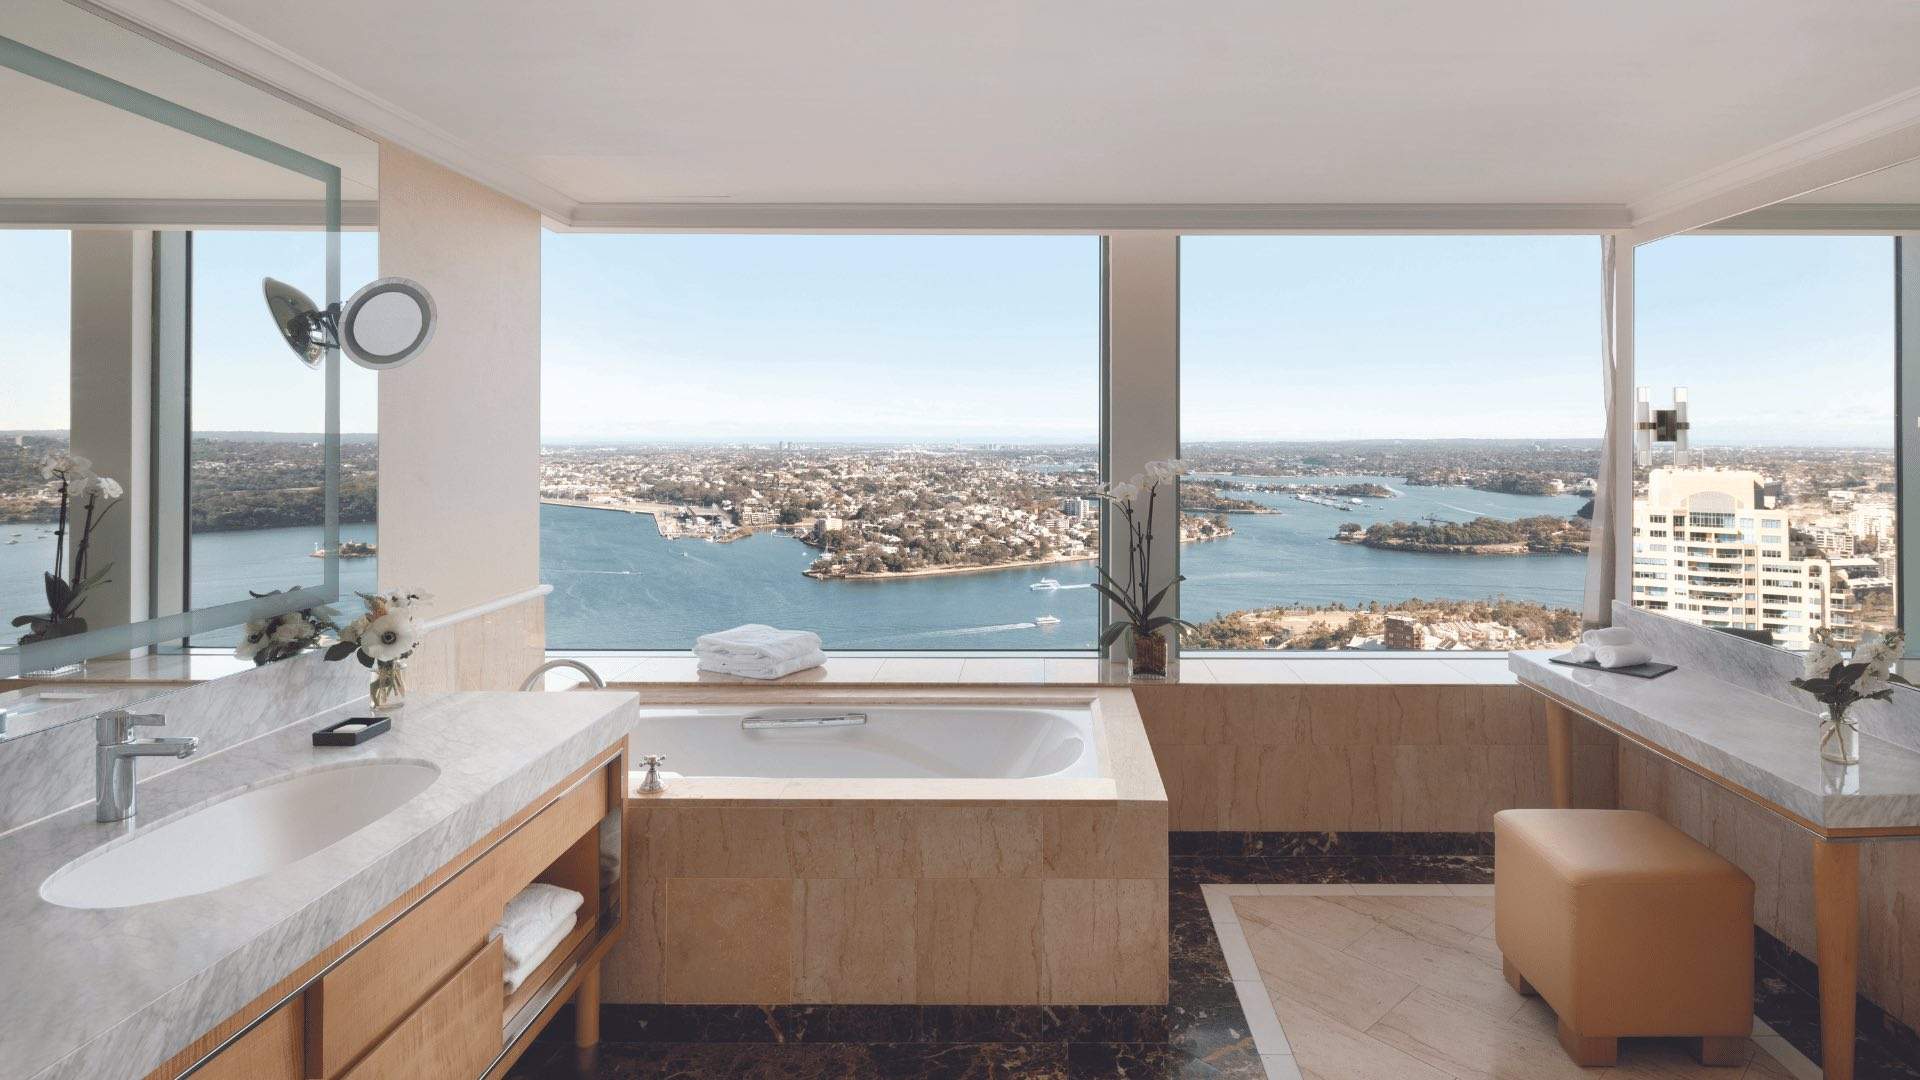 A bathroom with a view of Sydney Harbour at the Shangri-La Hotel.